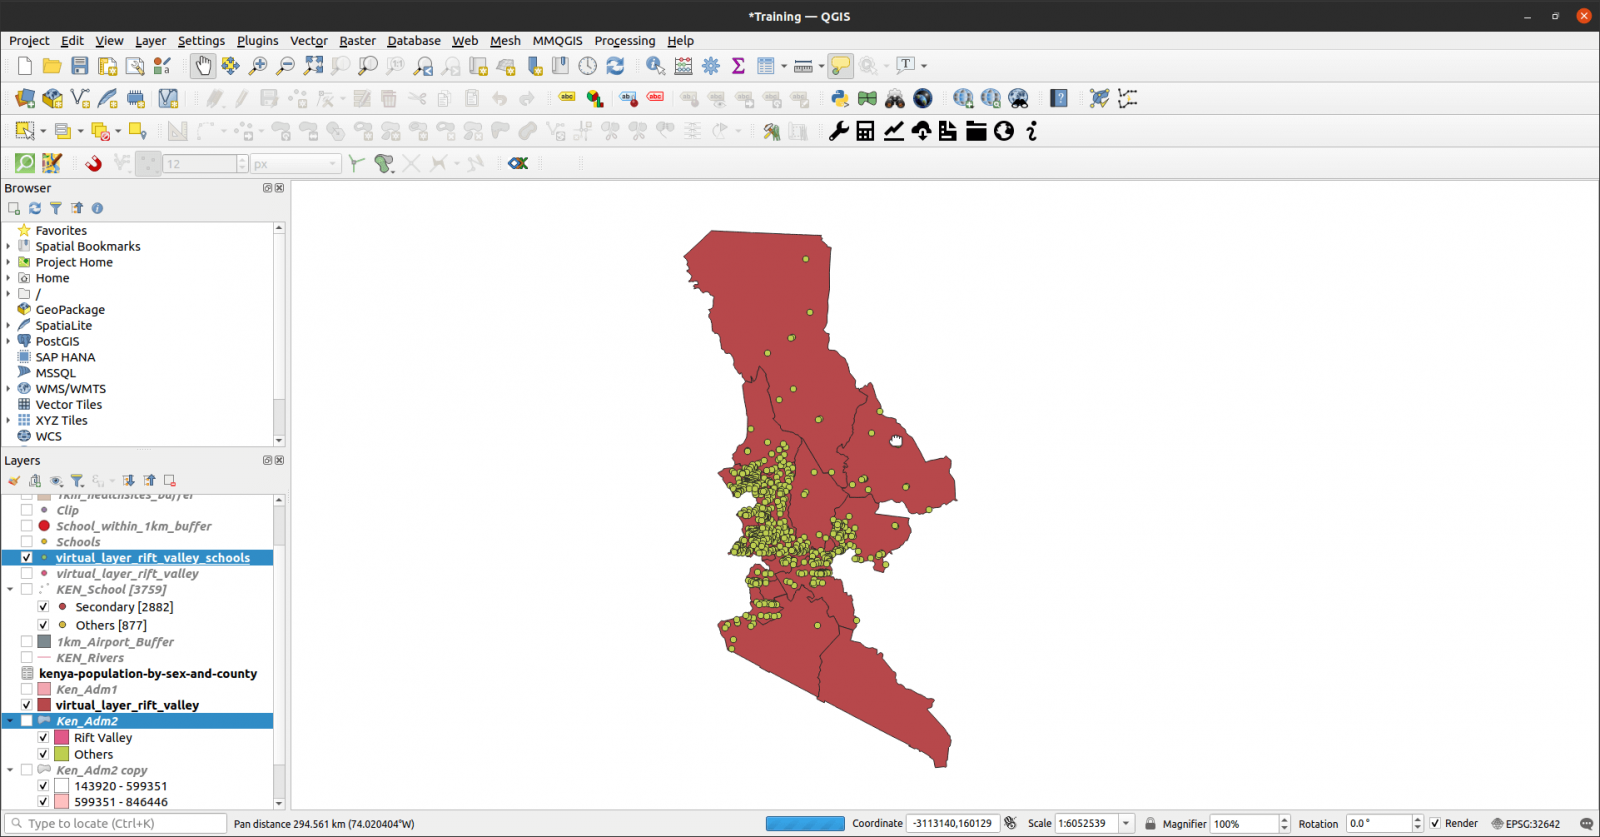 Virtual Layer in QGIS based on location